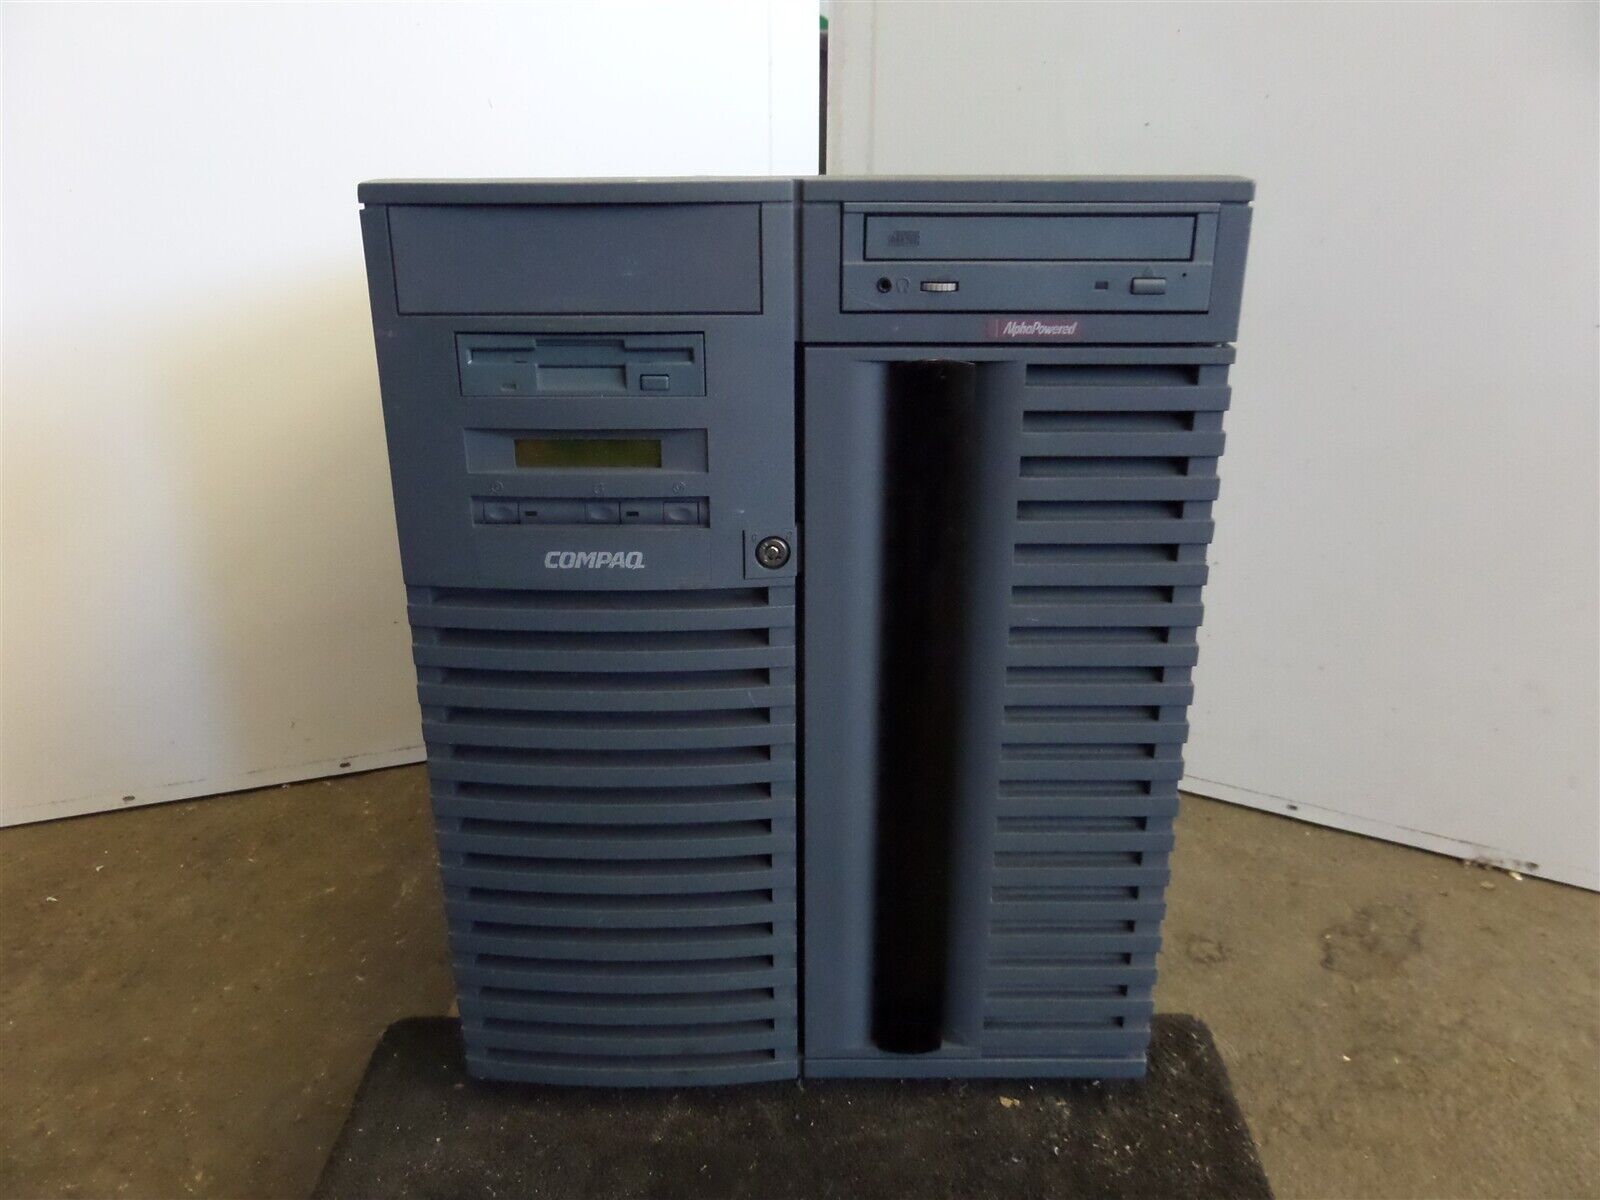 Compaq DS20 Alphaserver Computer - Base Model: DH-55NJA-AA - No HDDs